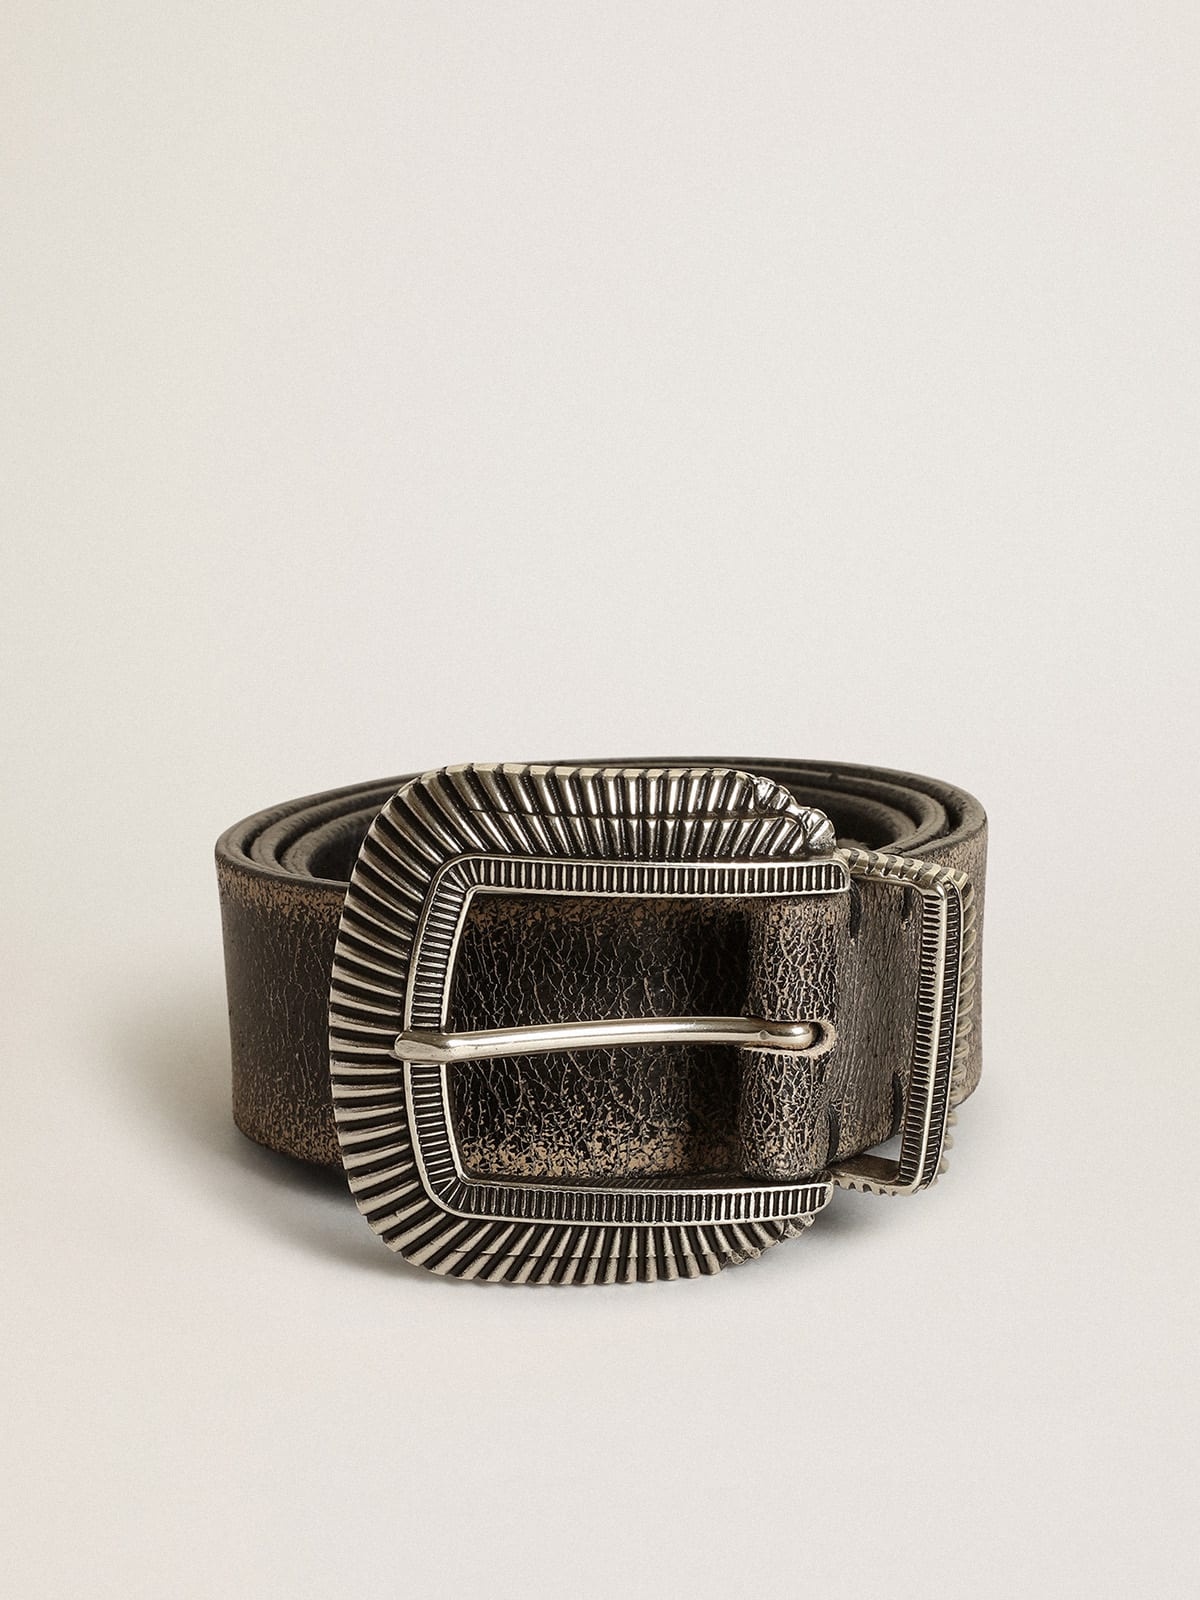 Men's belt in black leather with decorated buckle - 1